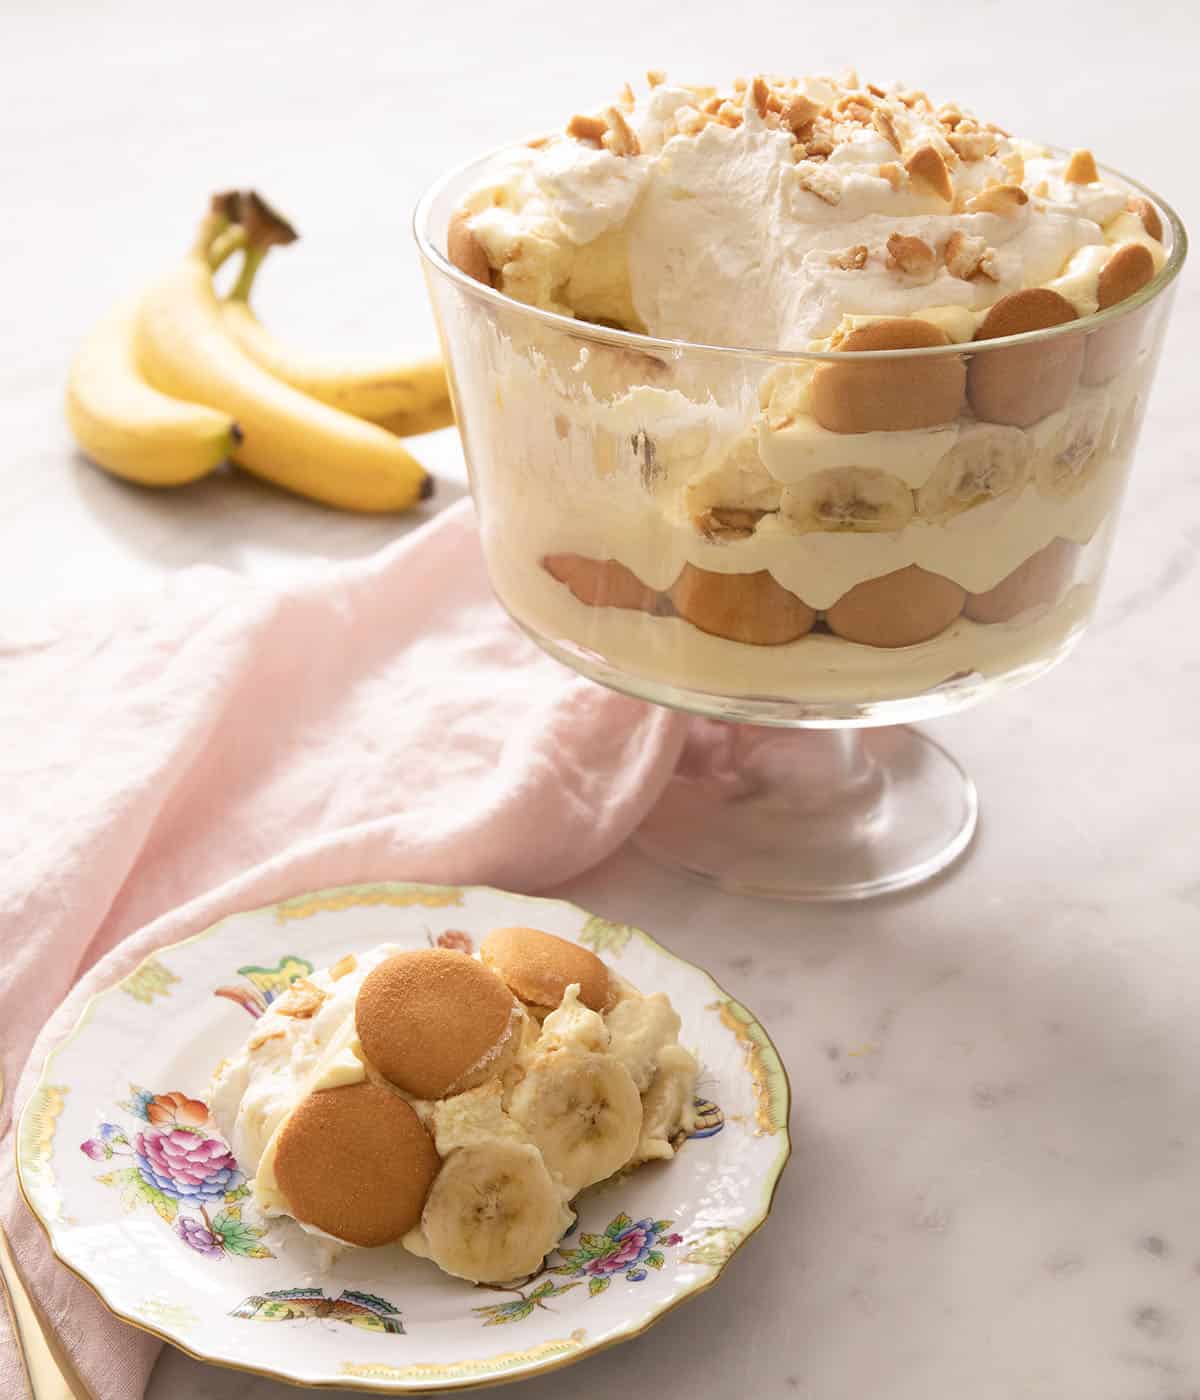 A serving of banana pudding on a porcelain plate next to a trifle dish.